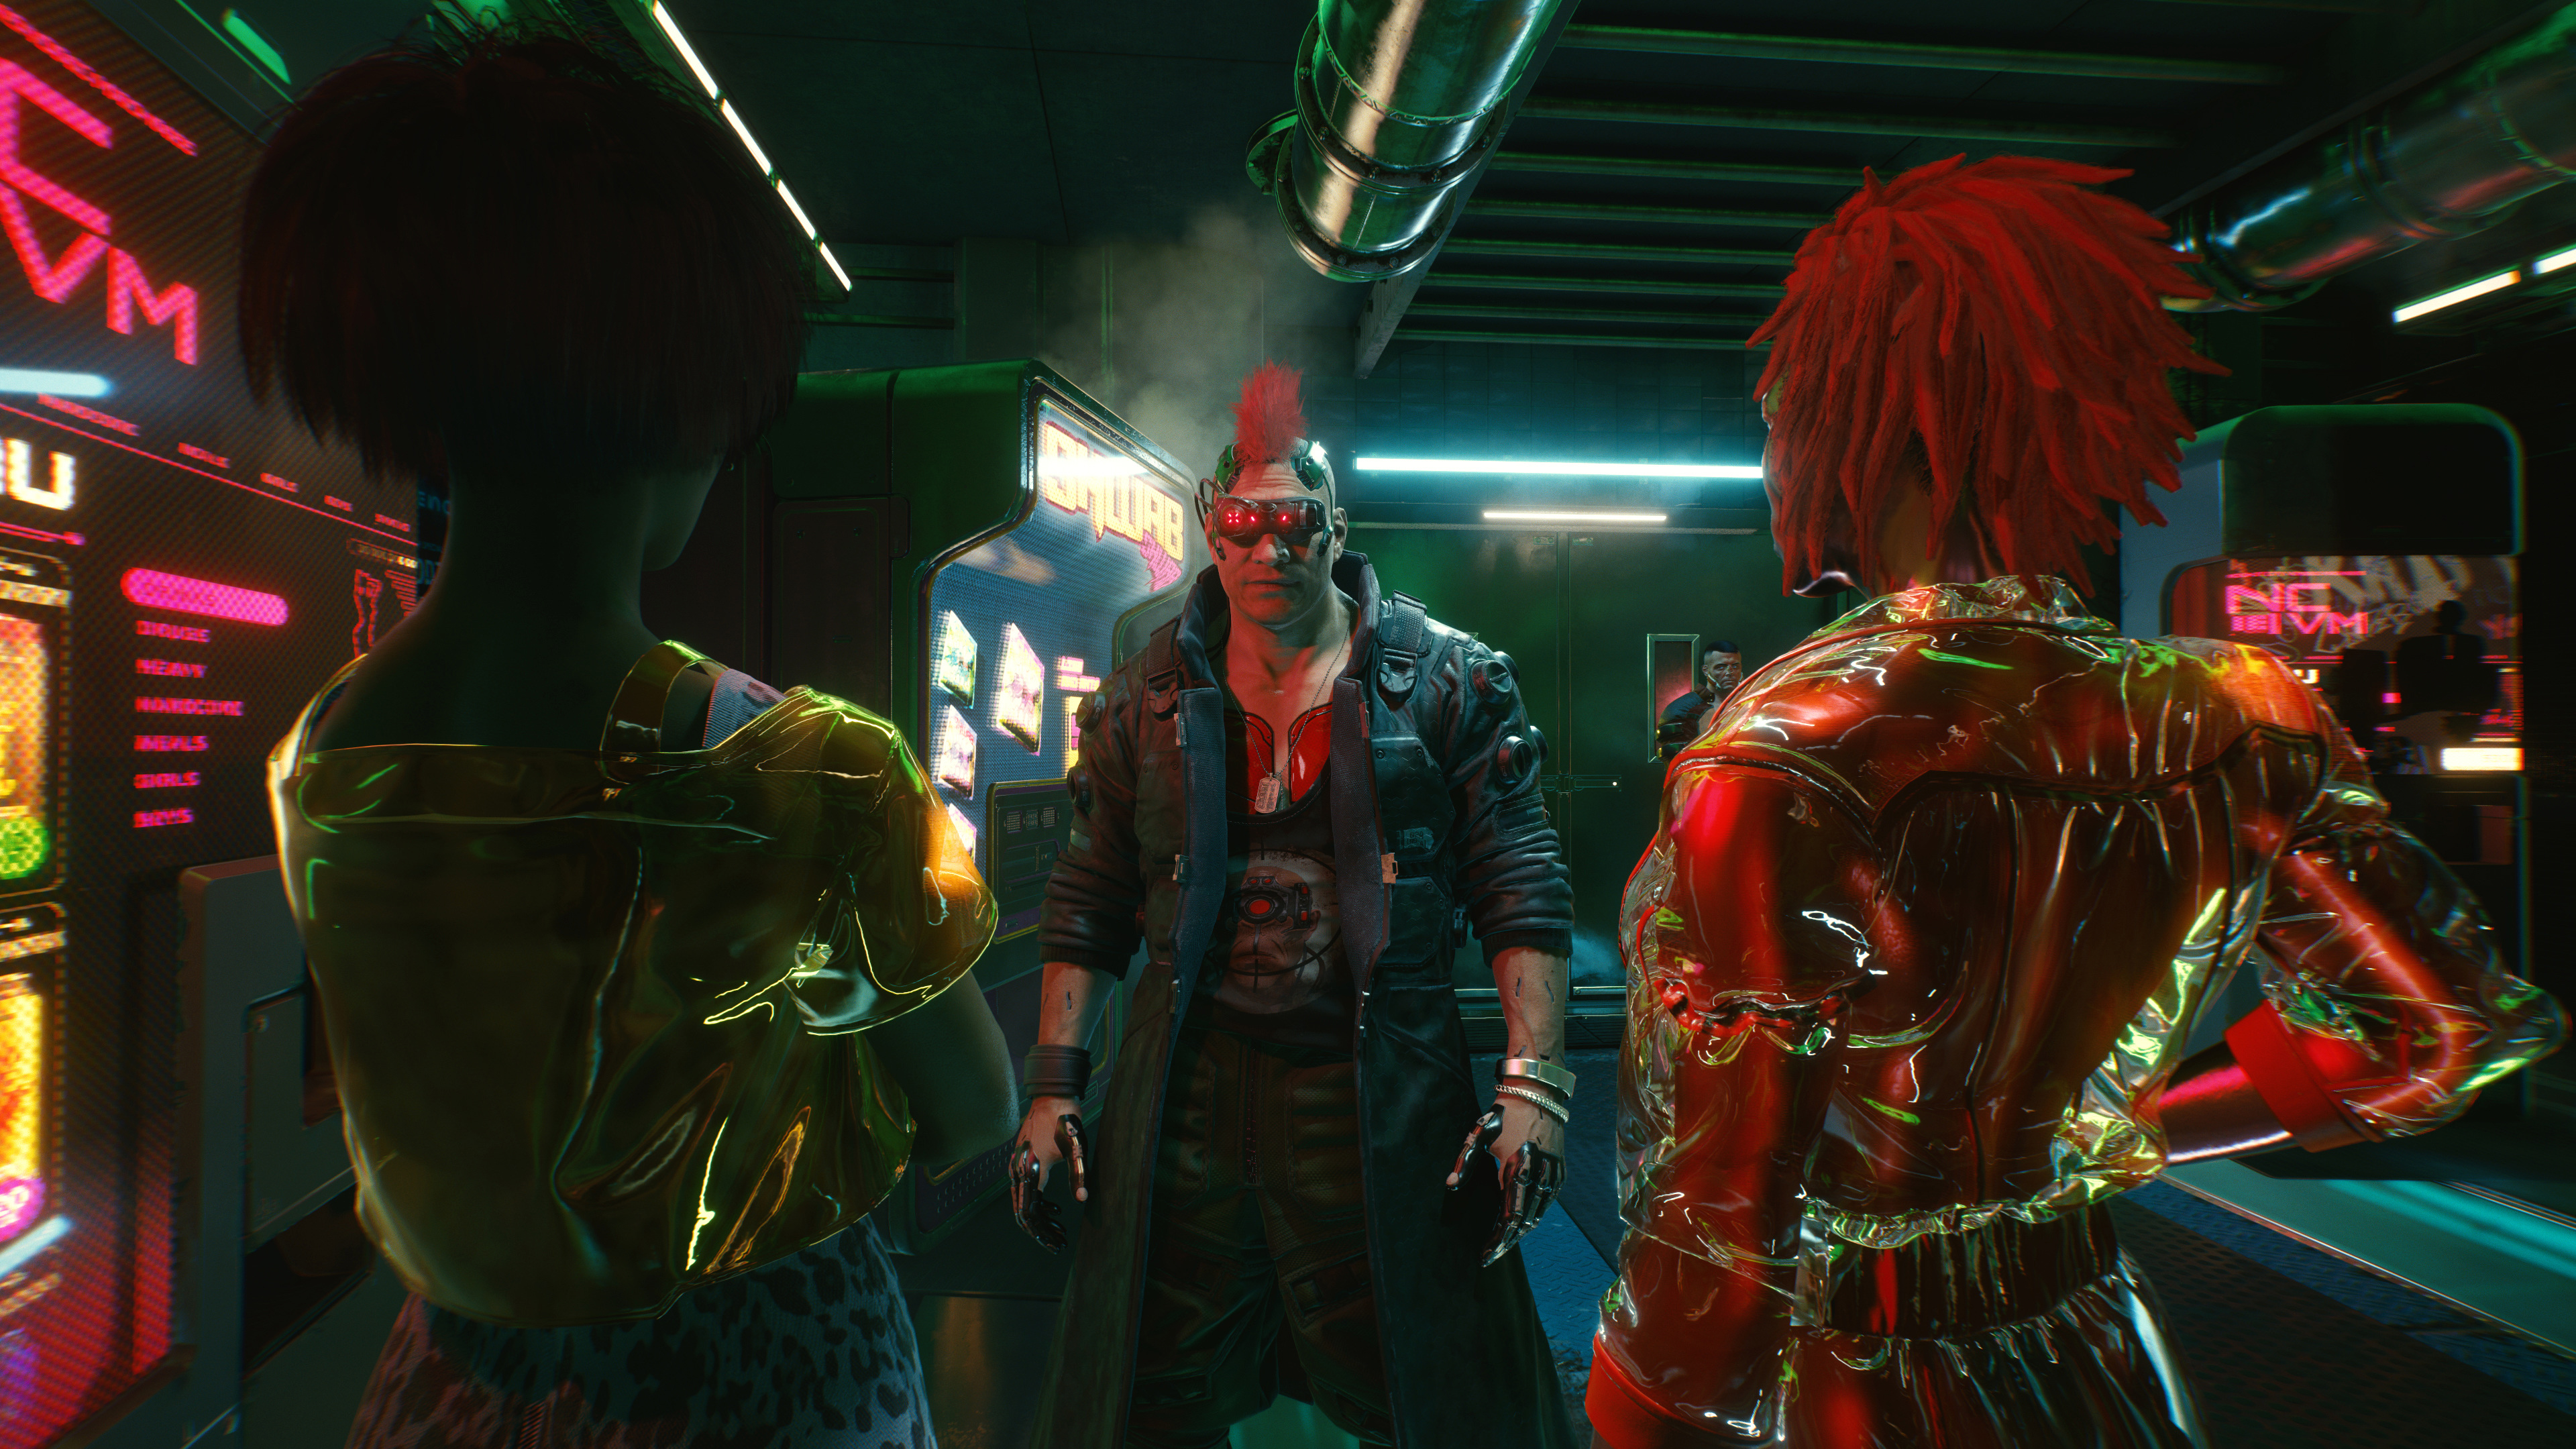 Cyberpunk 2077 4k 2020 Wallpaper,HD Games Wallpapers,4k Wallpapers,Images, Backgrounds,Photos and Pictures